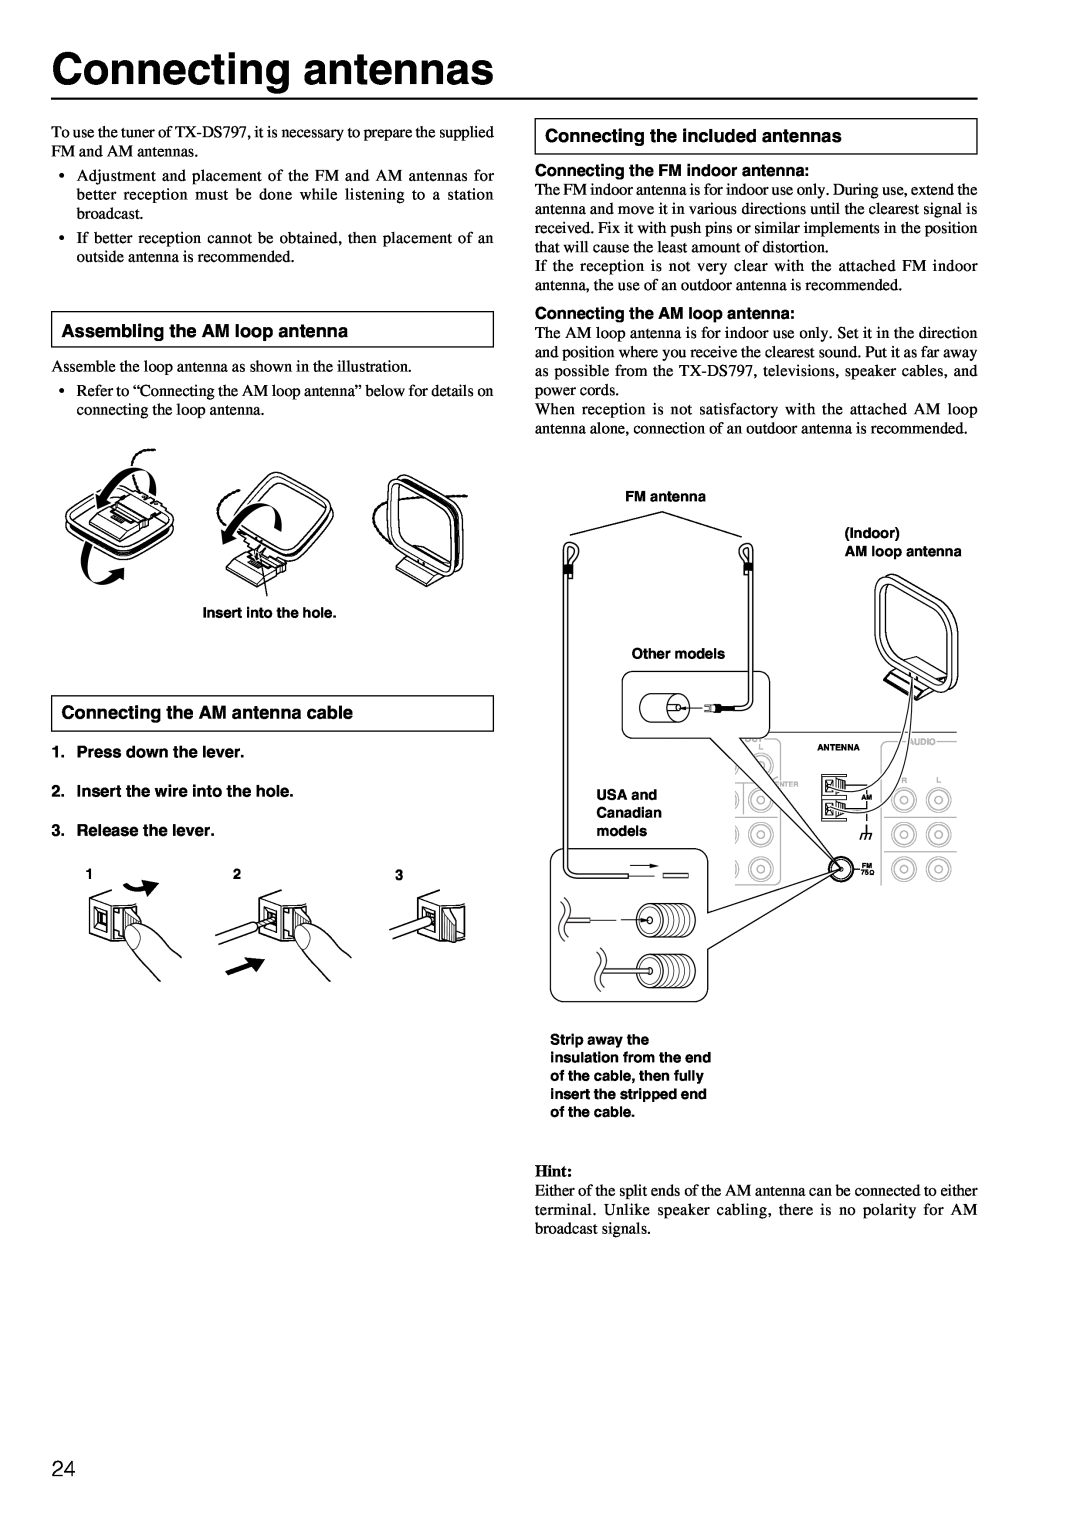 Onkyo TX-DS797 instruction manual Connecting antennas, Assembling the AM loop antenna, Connecting the included antennas 